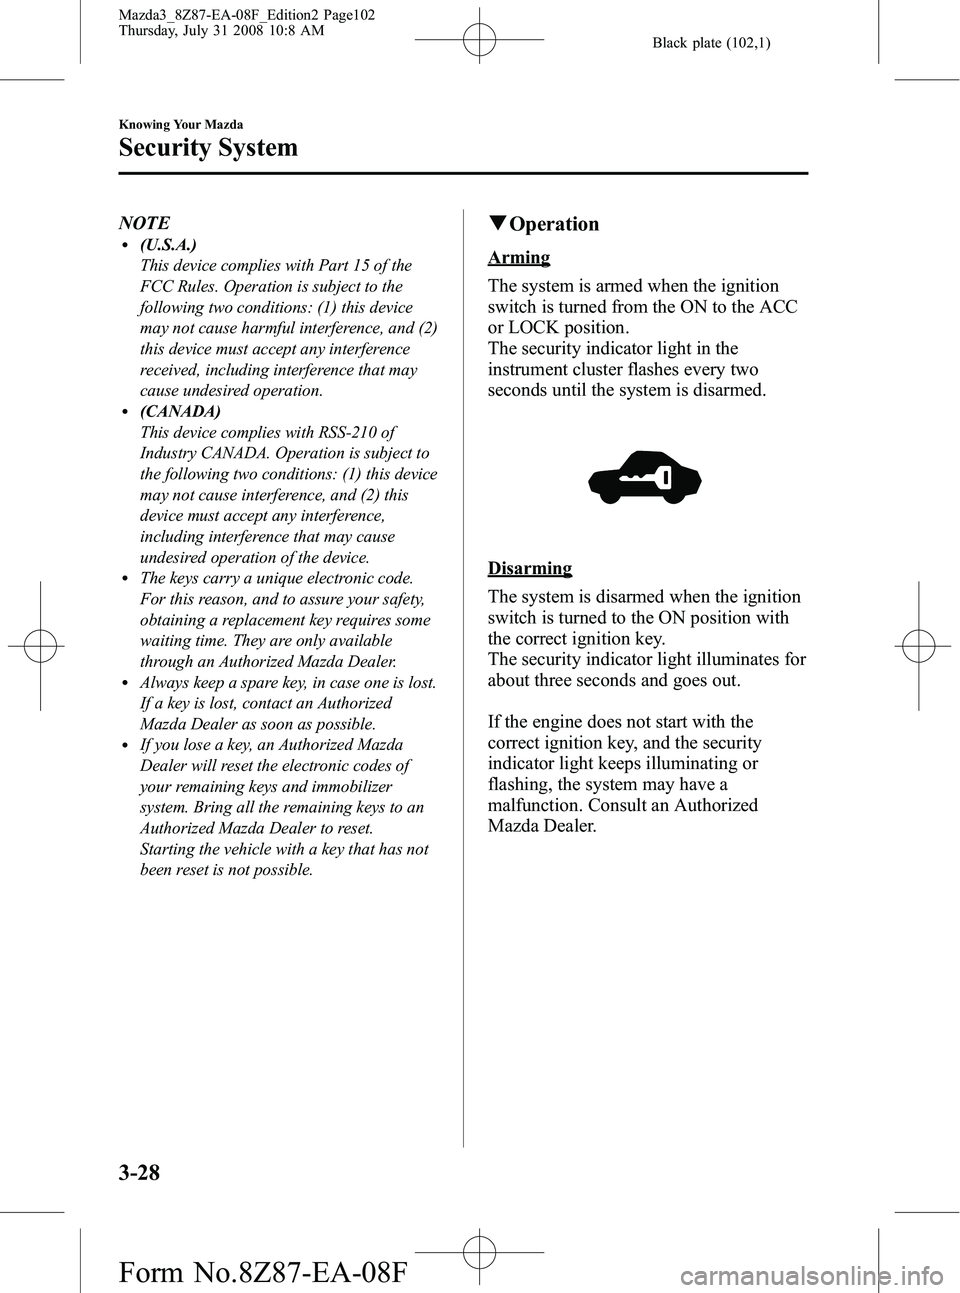 MAZDA MODEL 3 4-DOOR 2009  Owners Manual Black plate (102,1)
NOTEl(U.S.A.)
This device complies with Part 15 of the
FCC Rules. Operation is subject to the
following two conditions: (1) this device
may not cause harmful interference, and (2)
